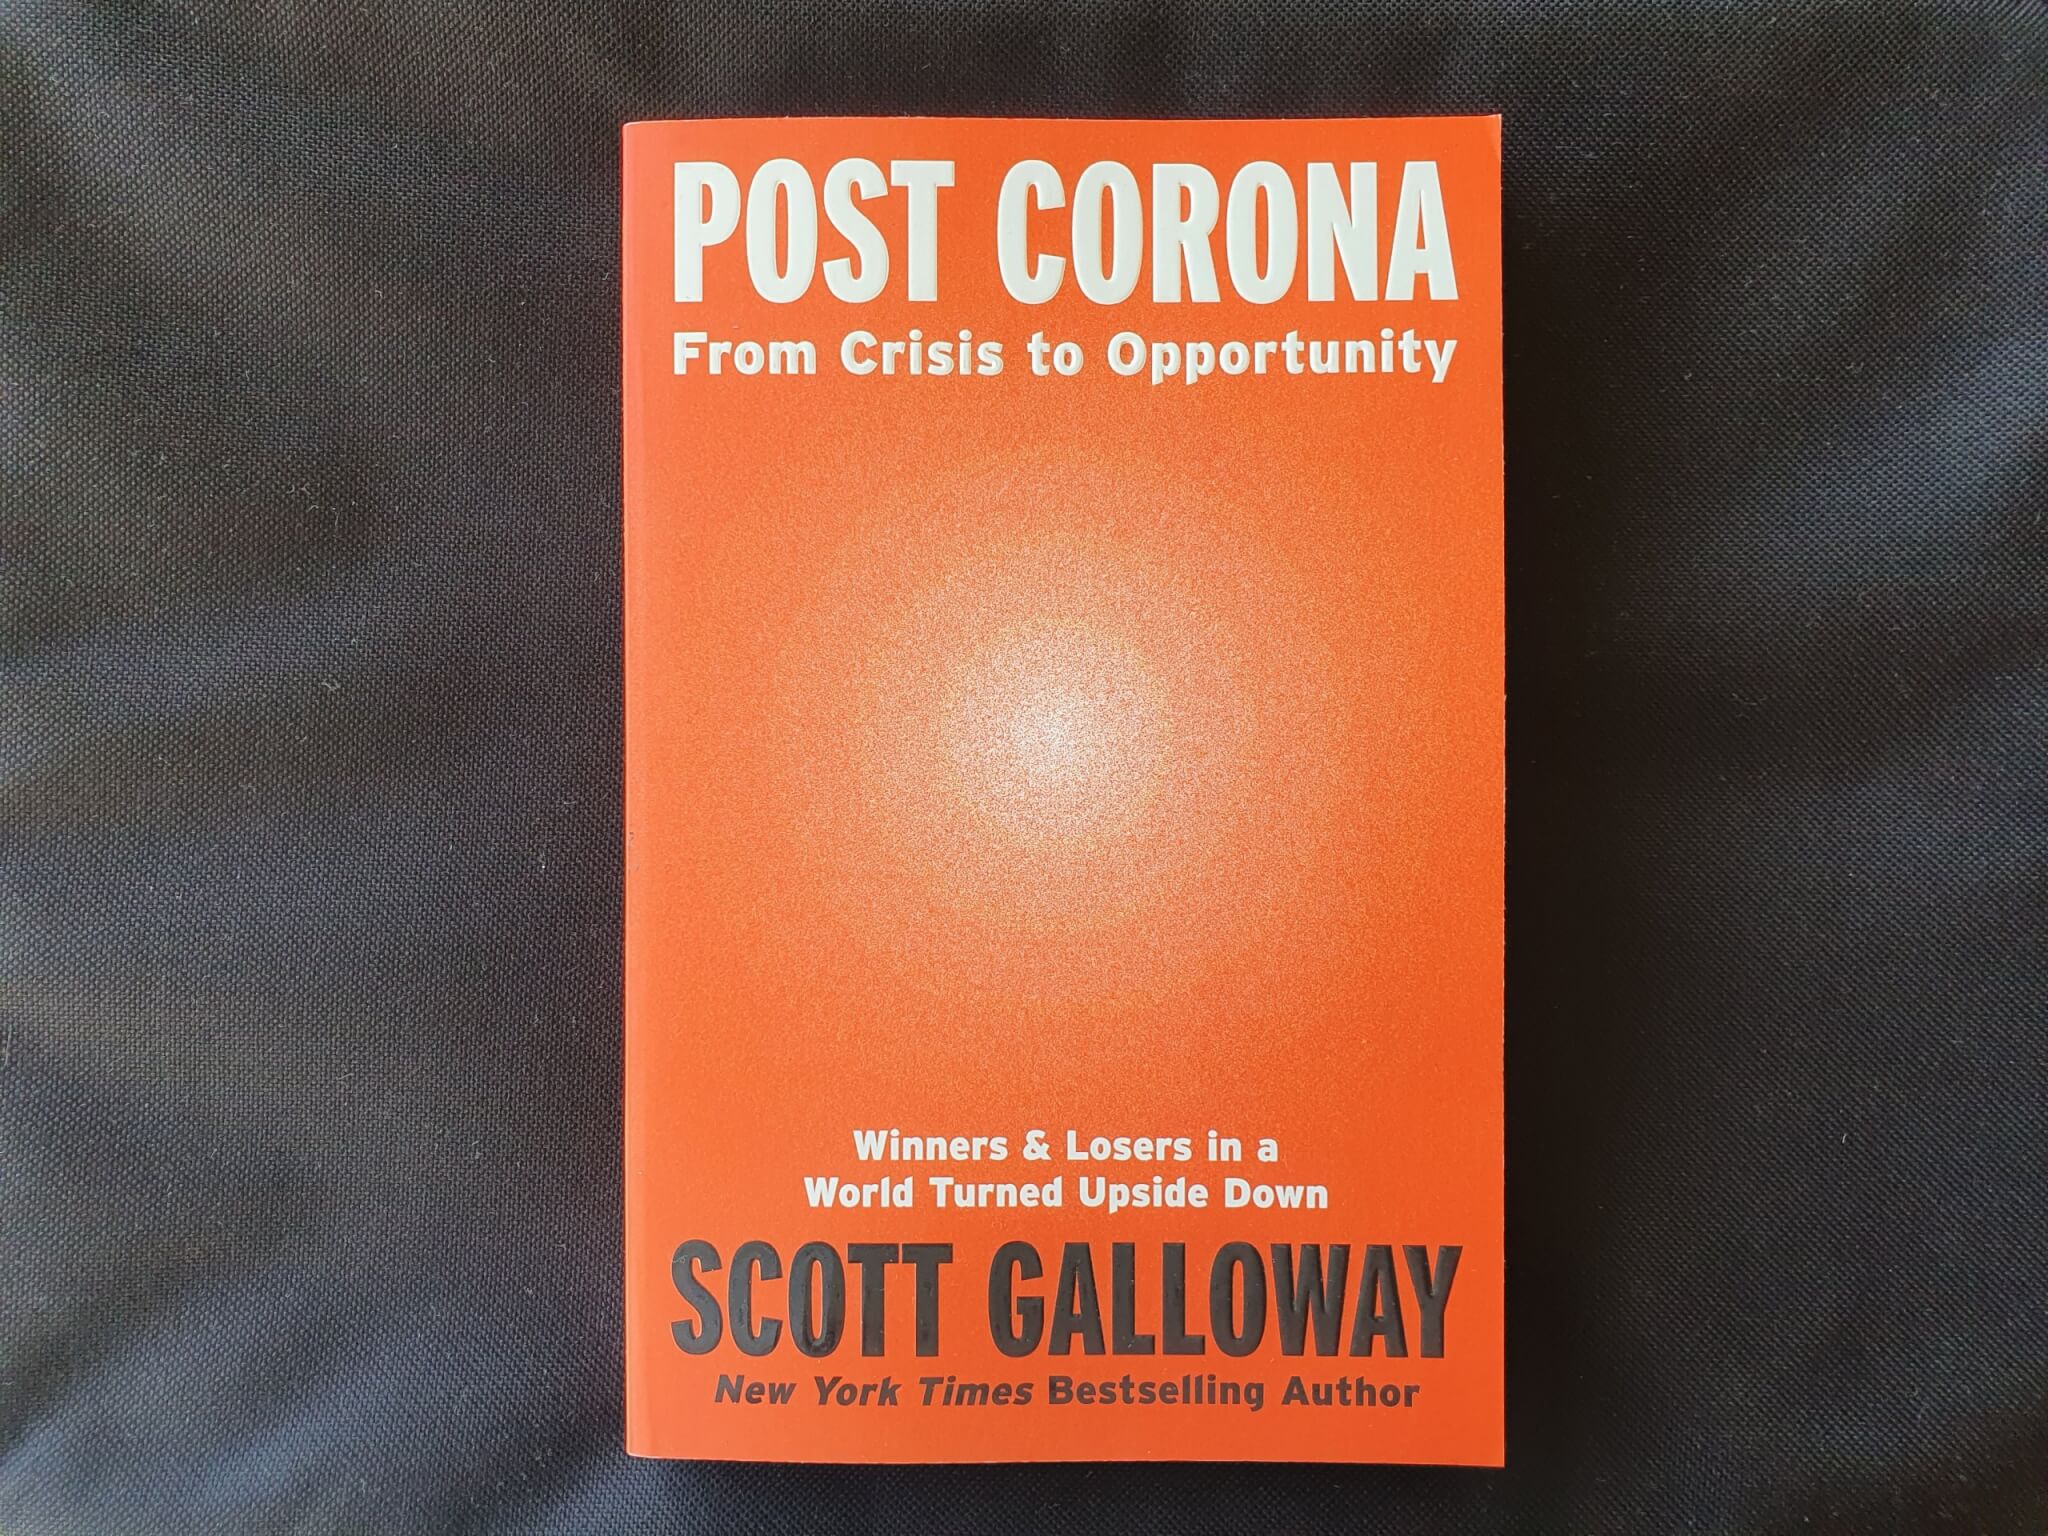 Magnify Consulting - Post Corona by Scott Galloway